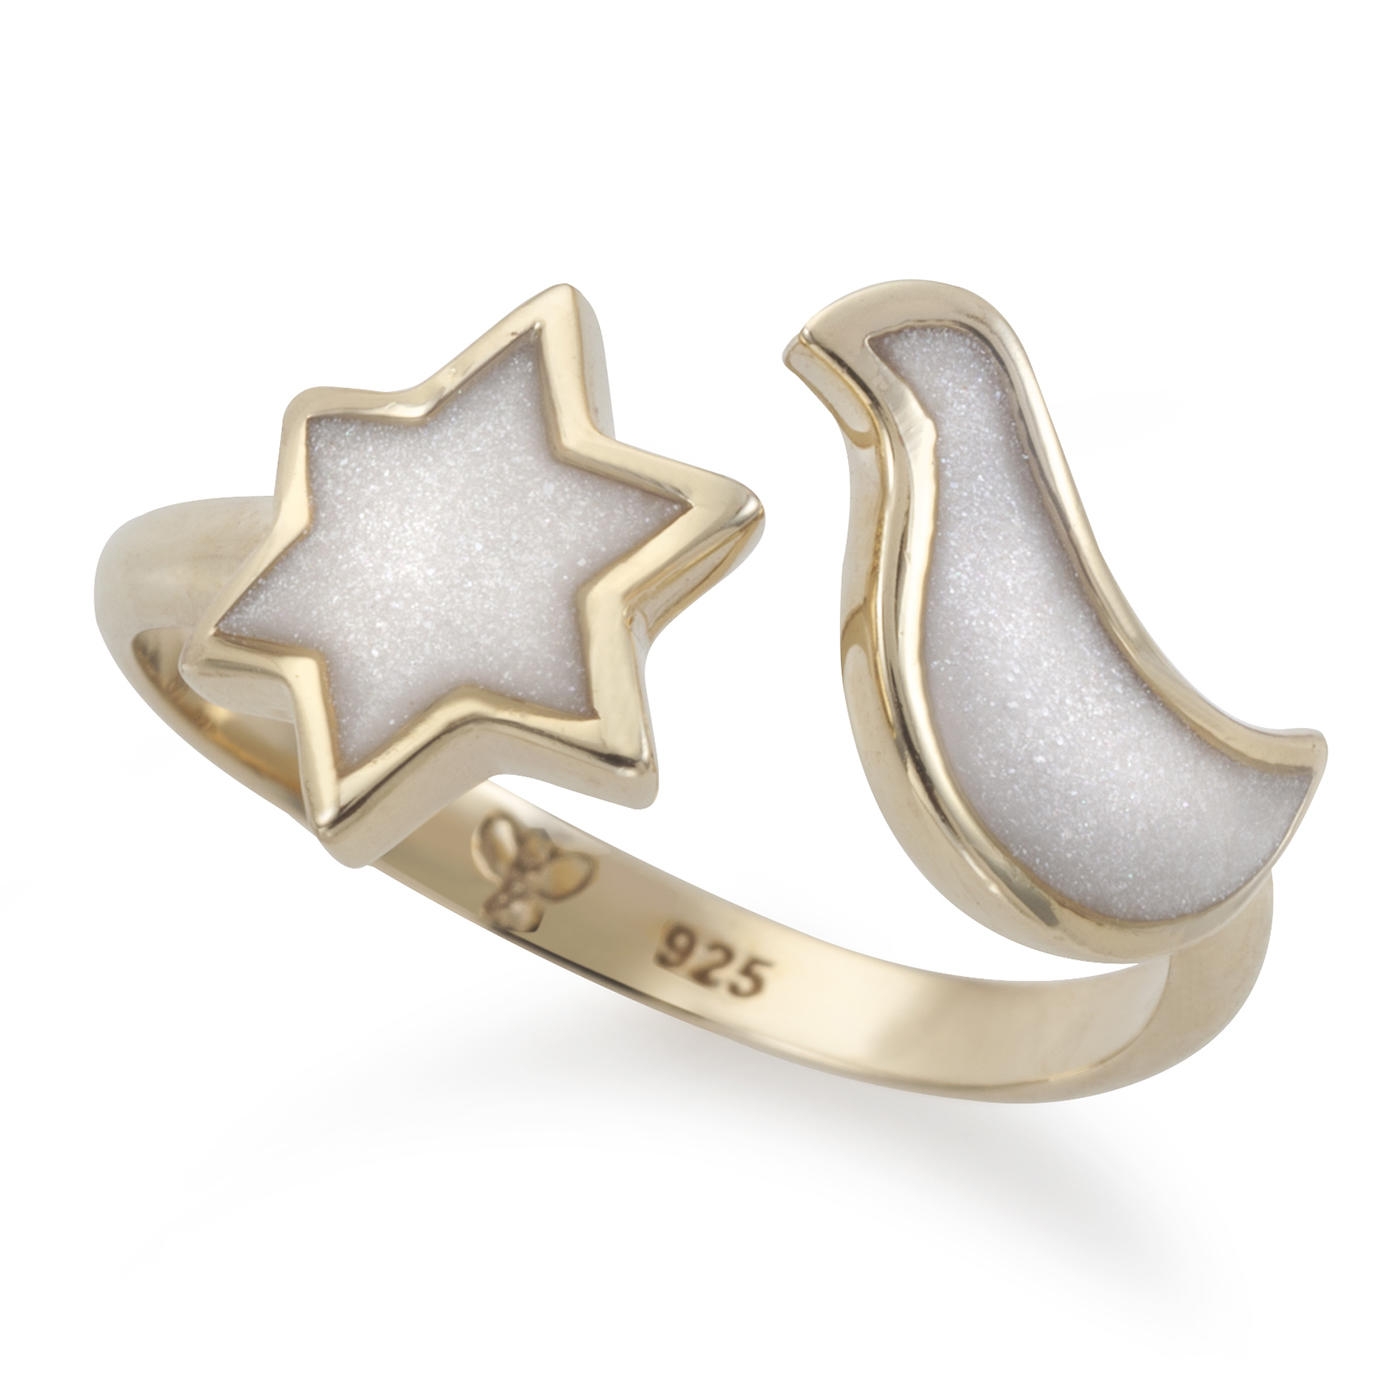 Adina Plastelina Dove and Star of David Gold Plated Adjustable Ring - Variety of Colors - 1